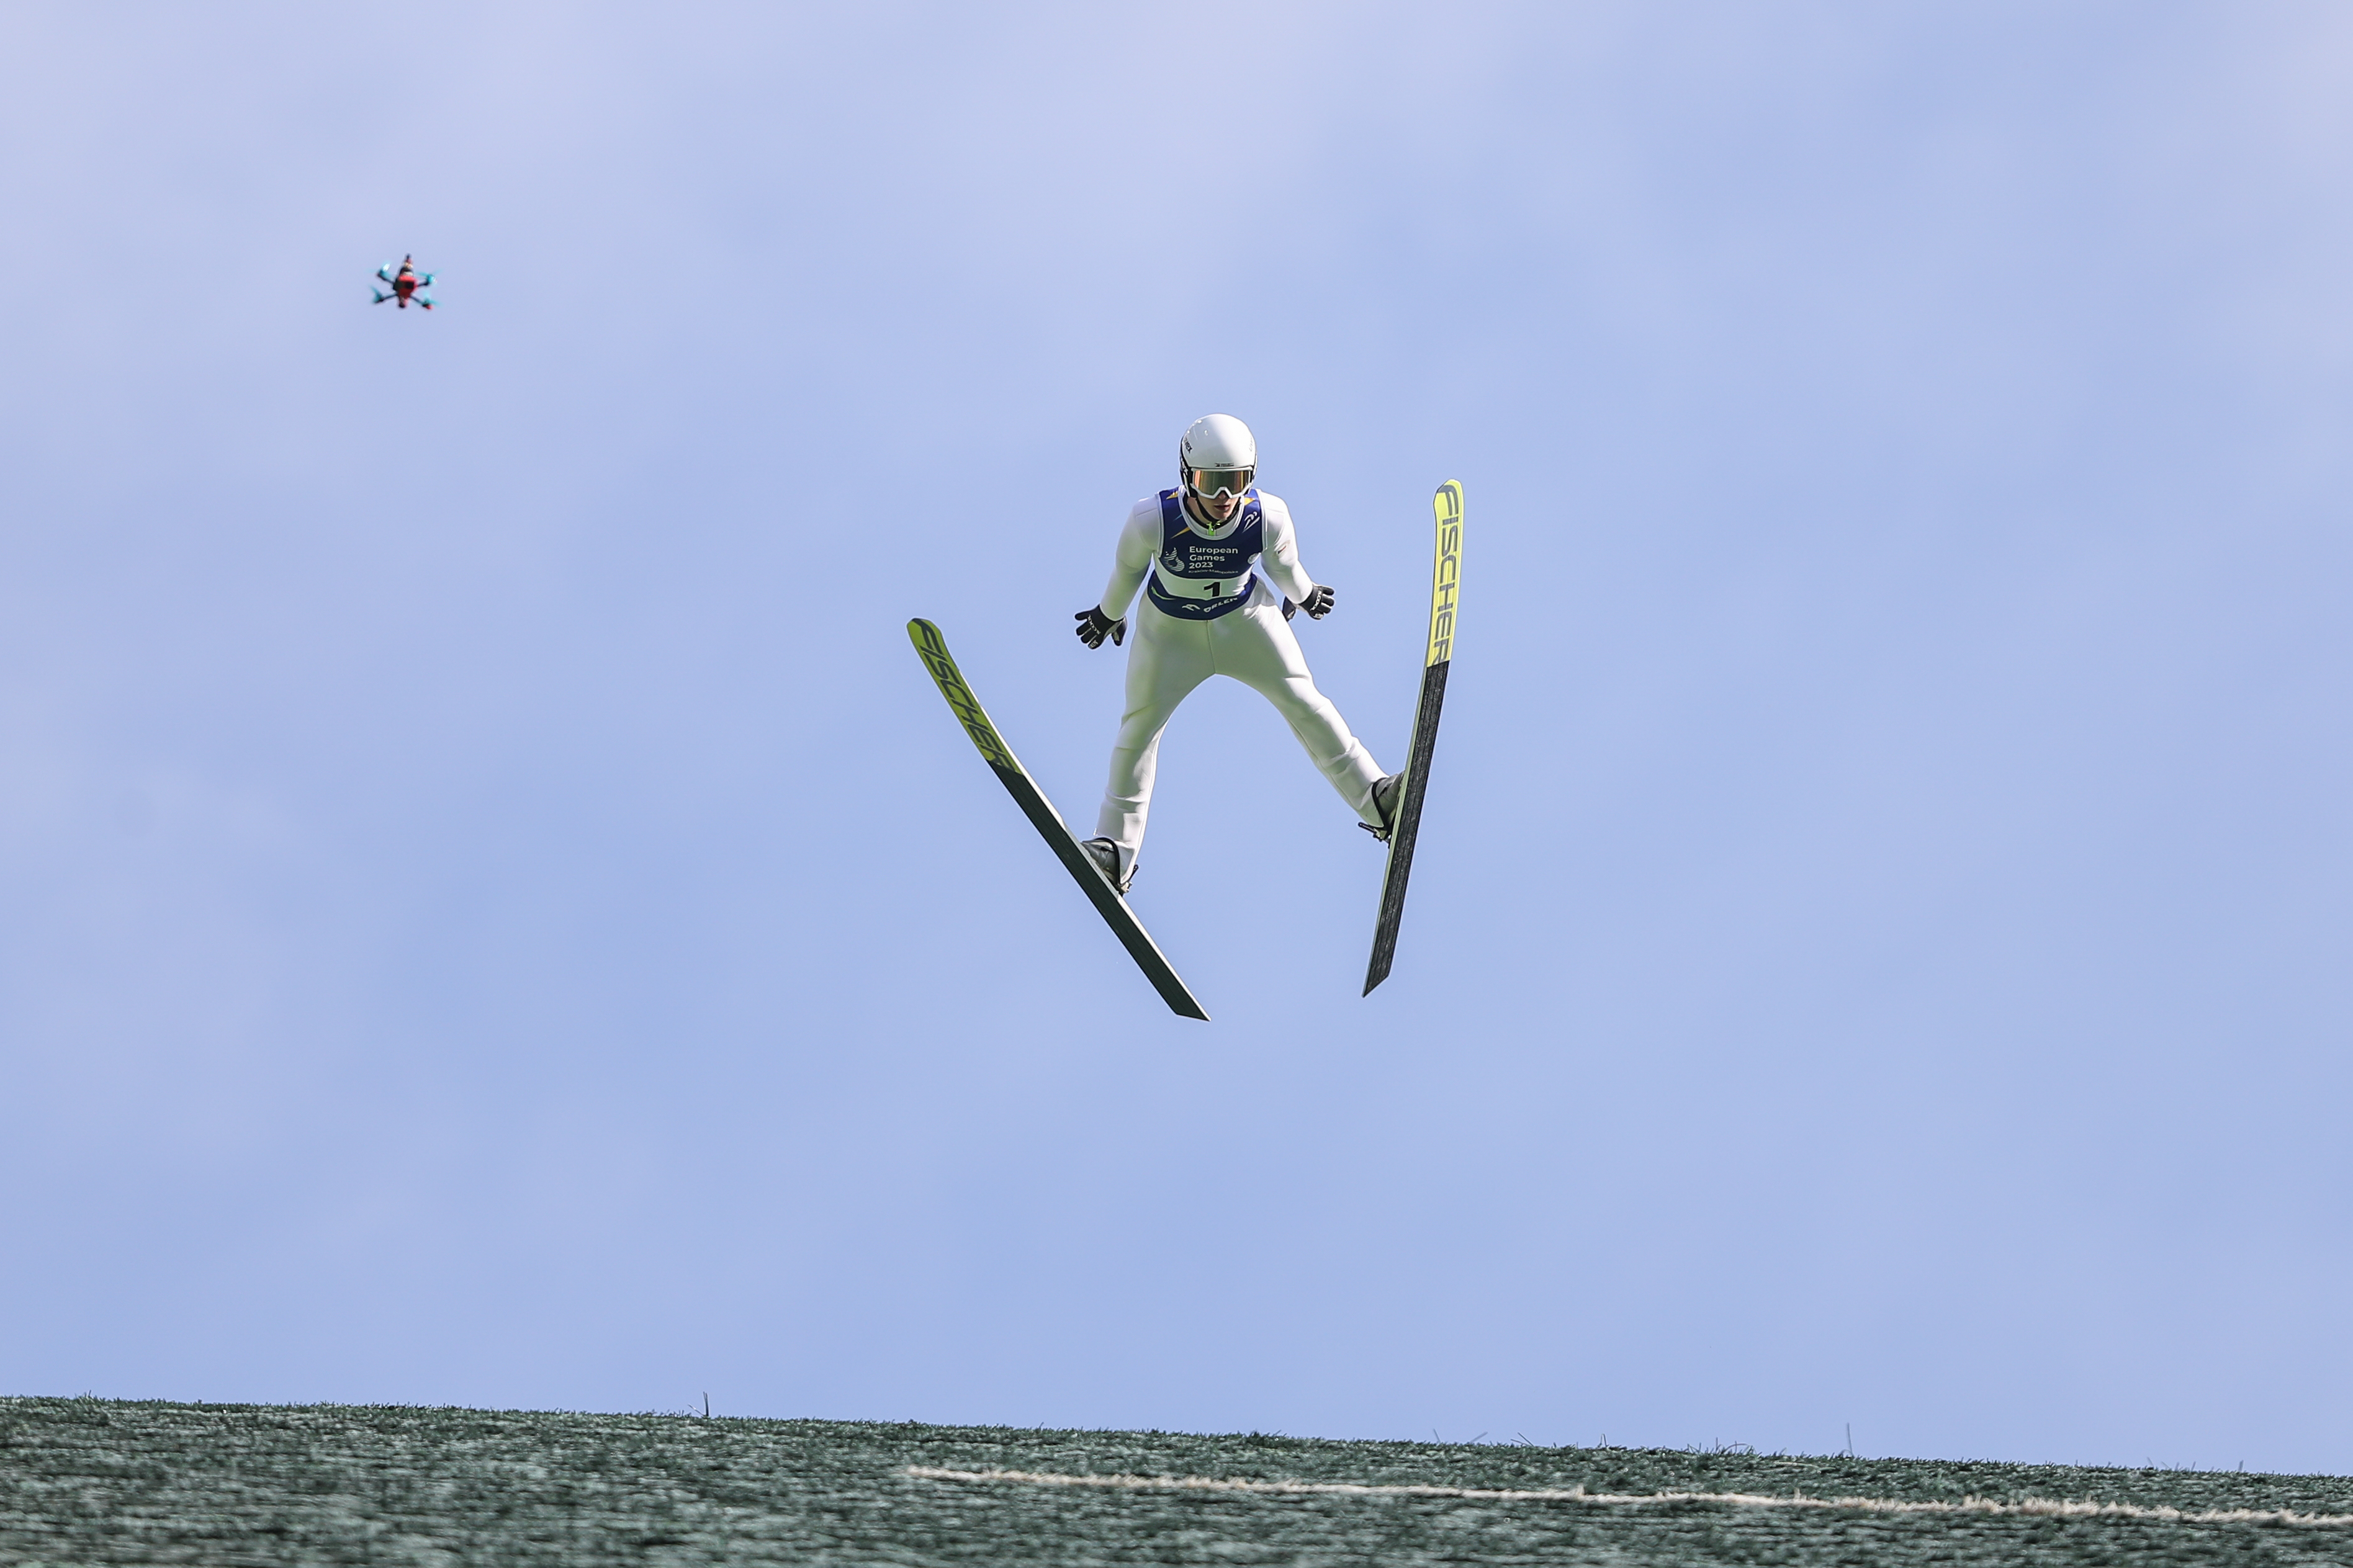 Thursday: two competitions in ski jumping